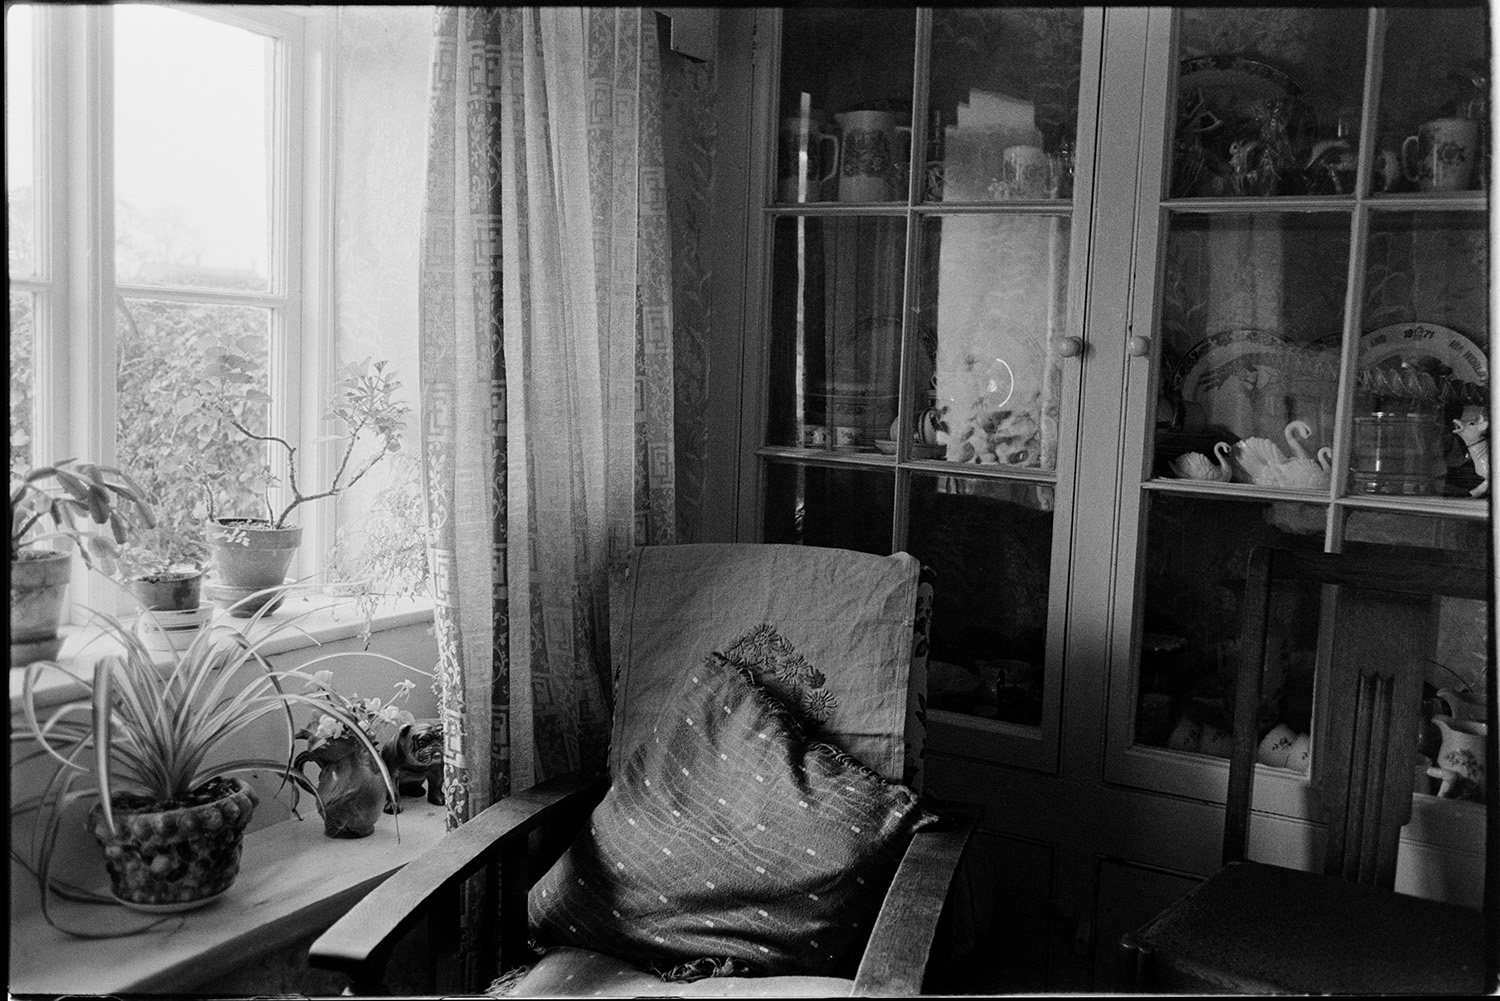 Interior of room with dresser and ornaments, corn dolly. 
[A dresser behind a chair in a room. The dresser is filled with china and ornaments. Pot plants are visible in the window sill.]